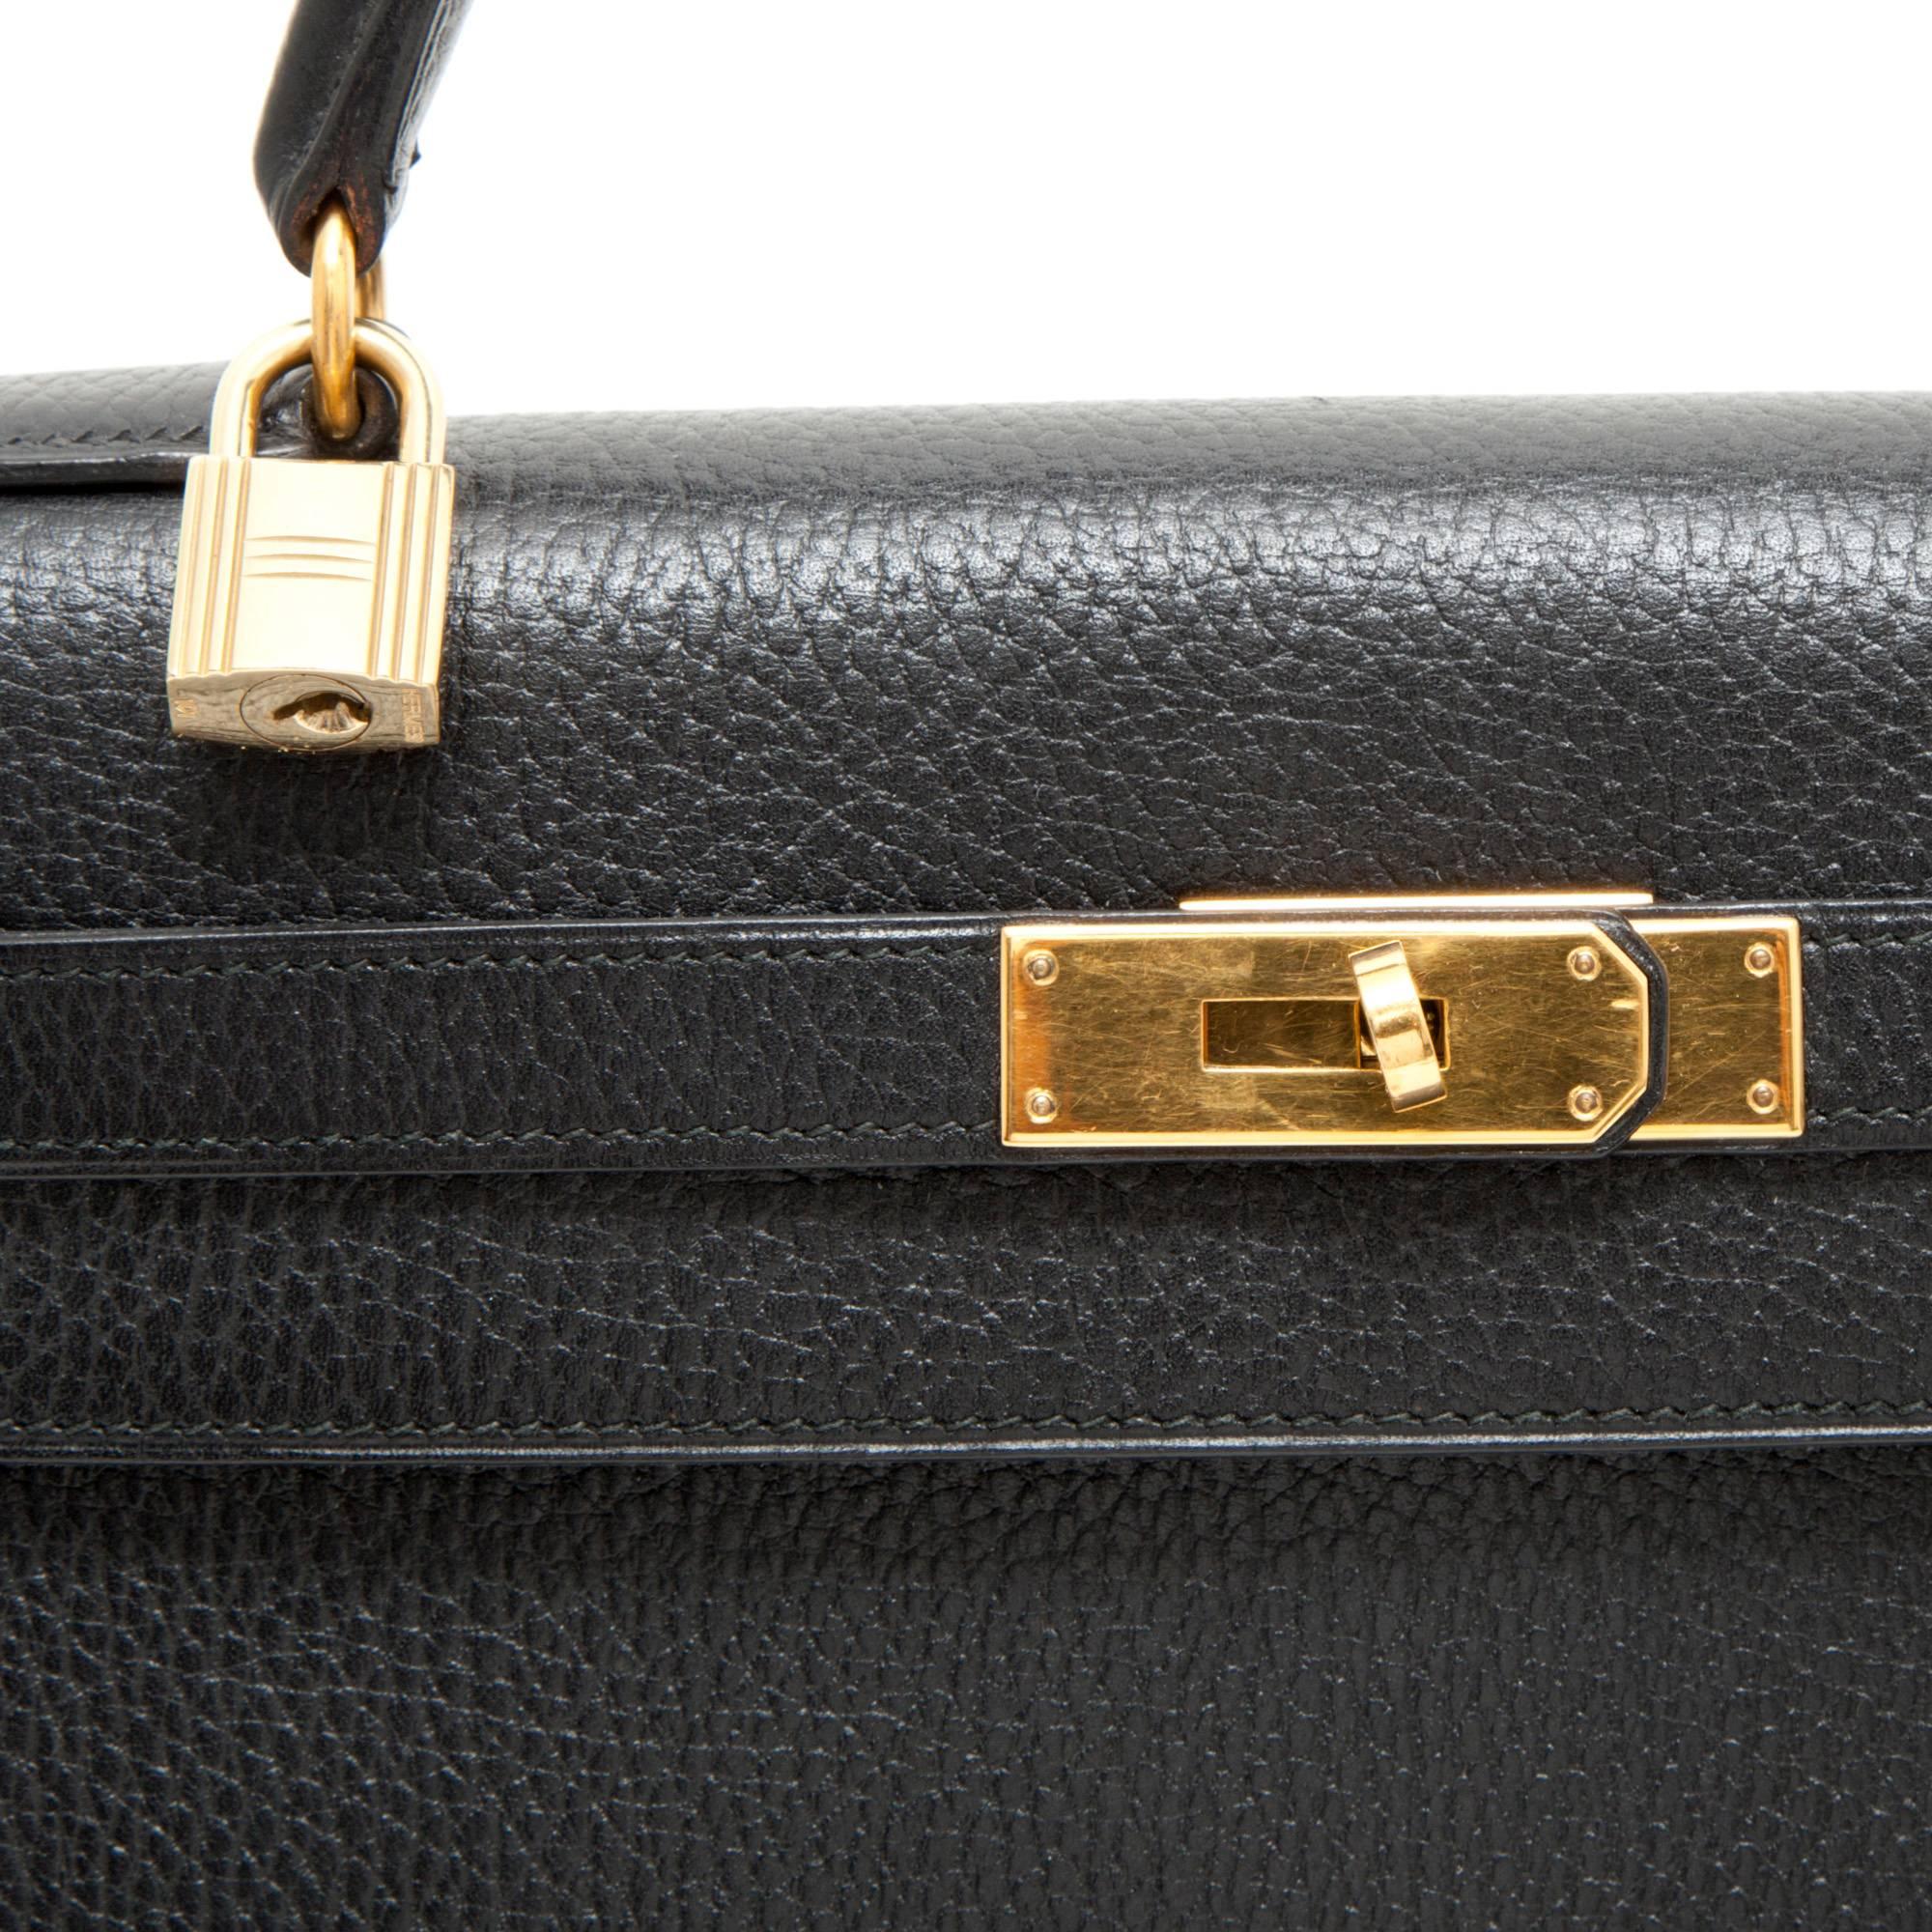 Hermes 'Kelly 32' in black Ardennes cowhide with stitching saddlery. The hardware is in gilded brass. 

The interior is lined with black leather with a zipped pocket and open pockets. 

Stamp X in a circle (Year 1994). 

Will be delivered in its